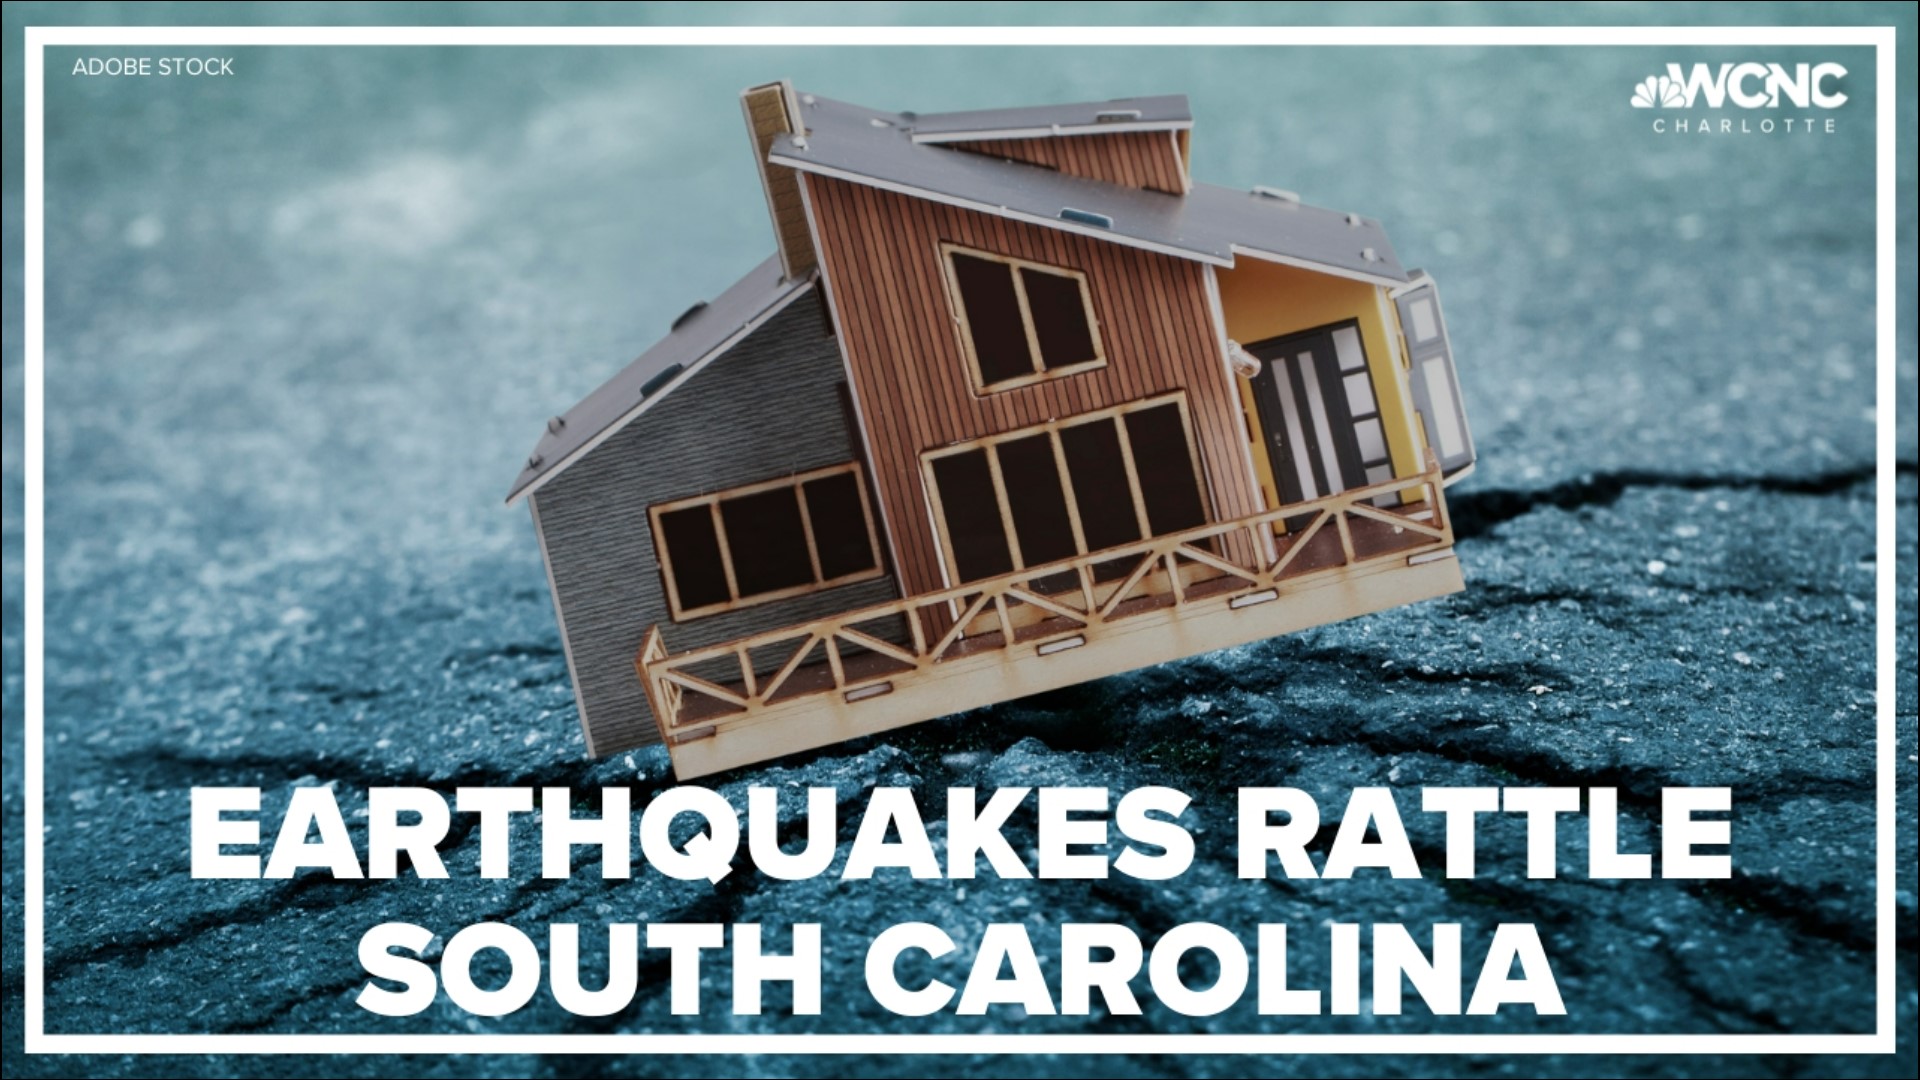 Two separate earthquakes hit South Carolina, and some of the effects could be felt in Charlotte.